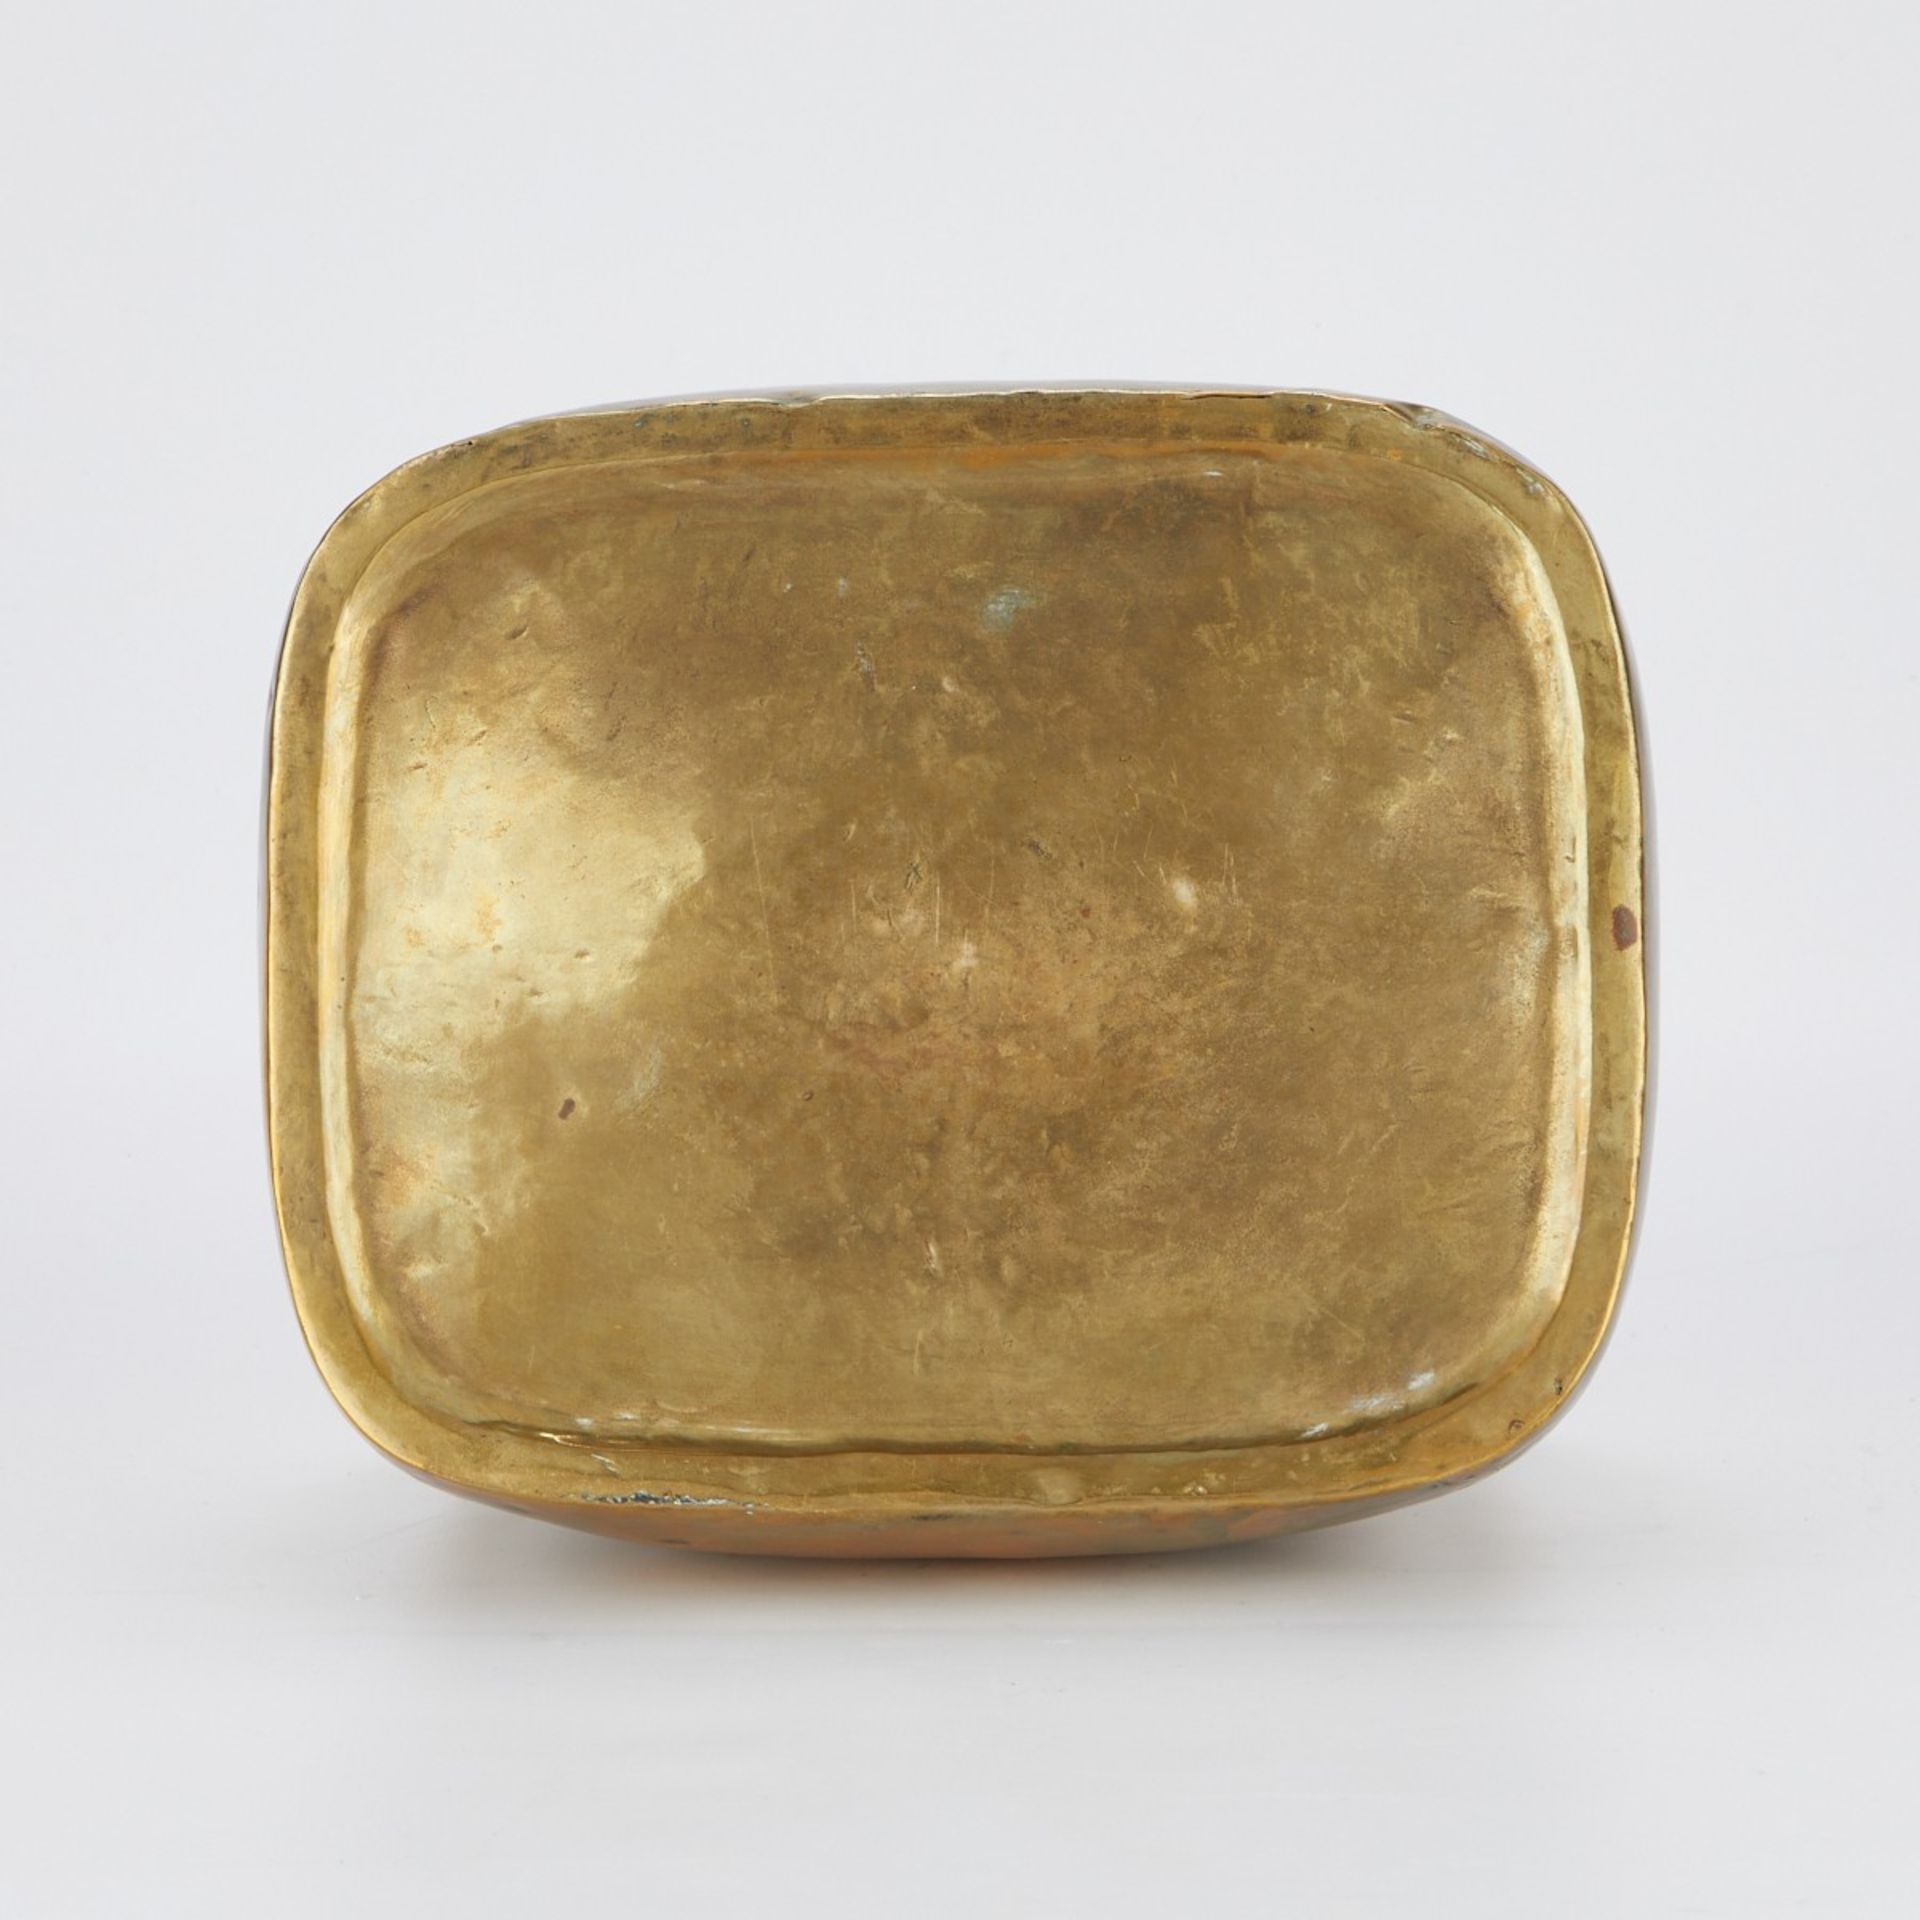 Lrg Chinese Qing Brass Hand Foot Warmer - Image 7 of 8